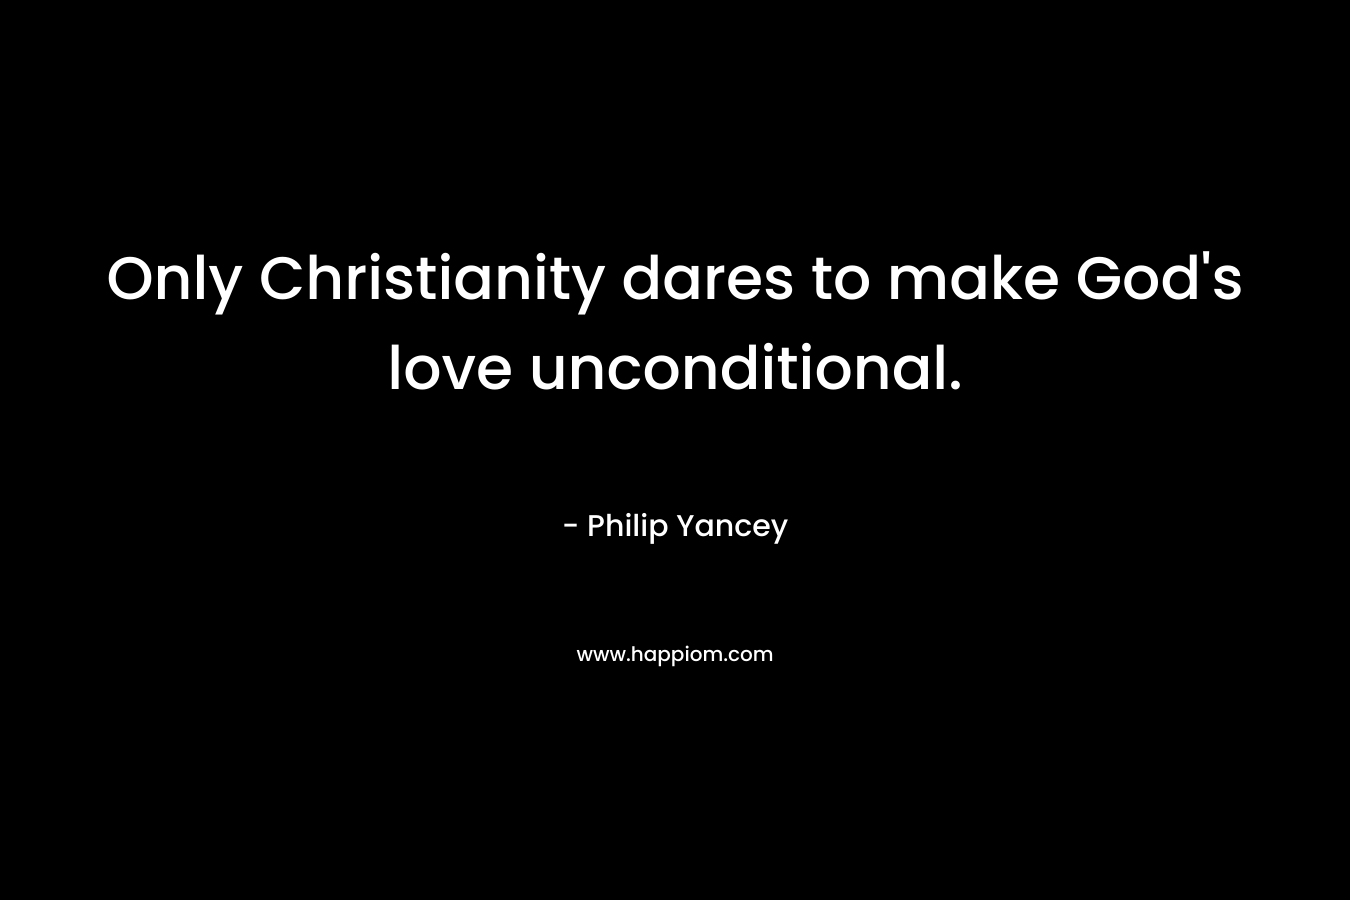 Only Christianity dares to make God’s love unconditional. – Philip Yancey